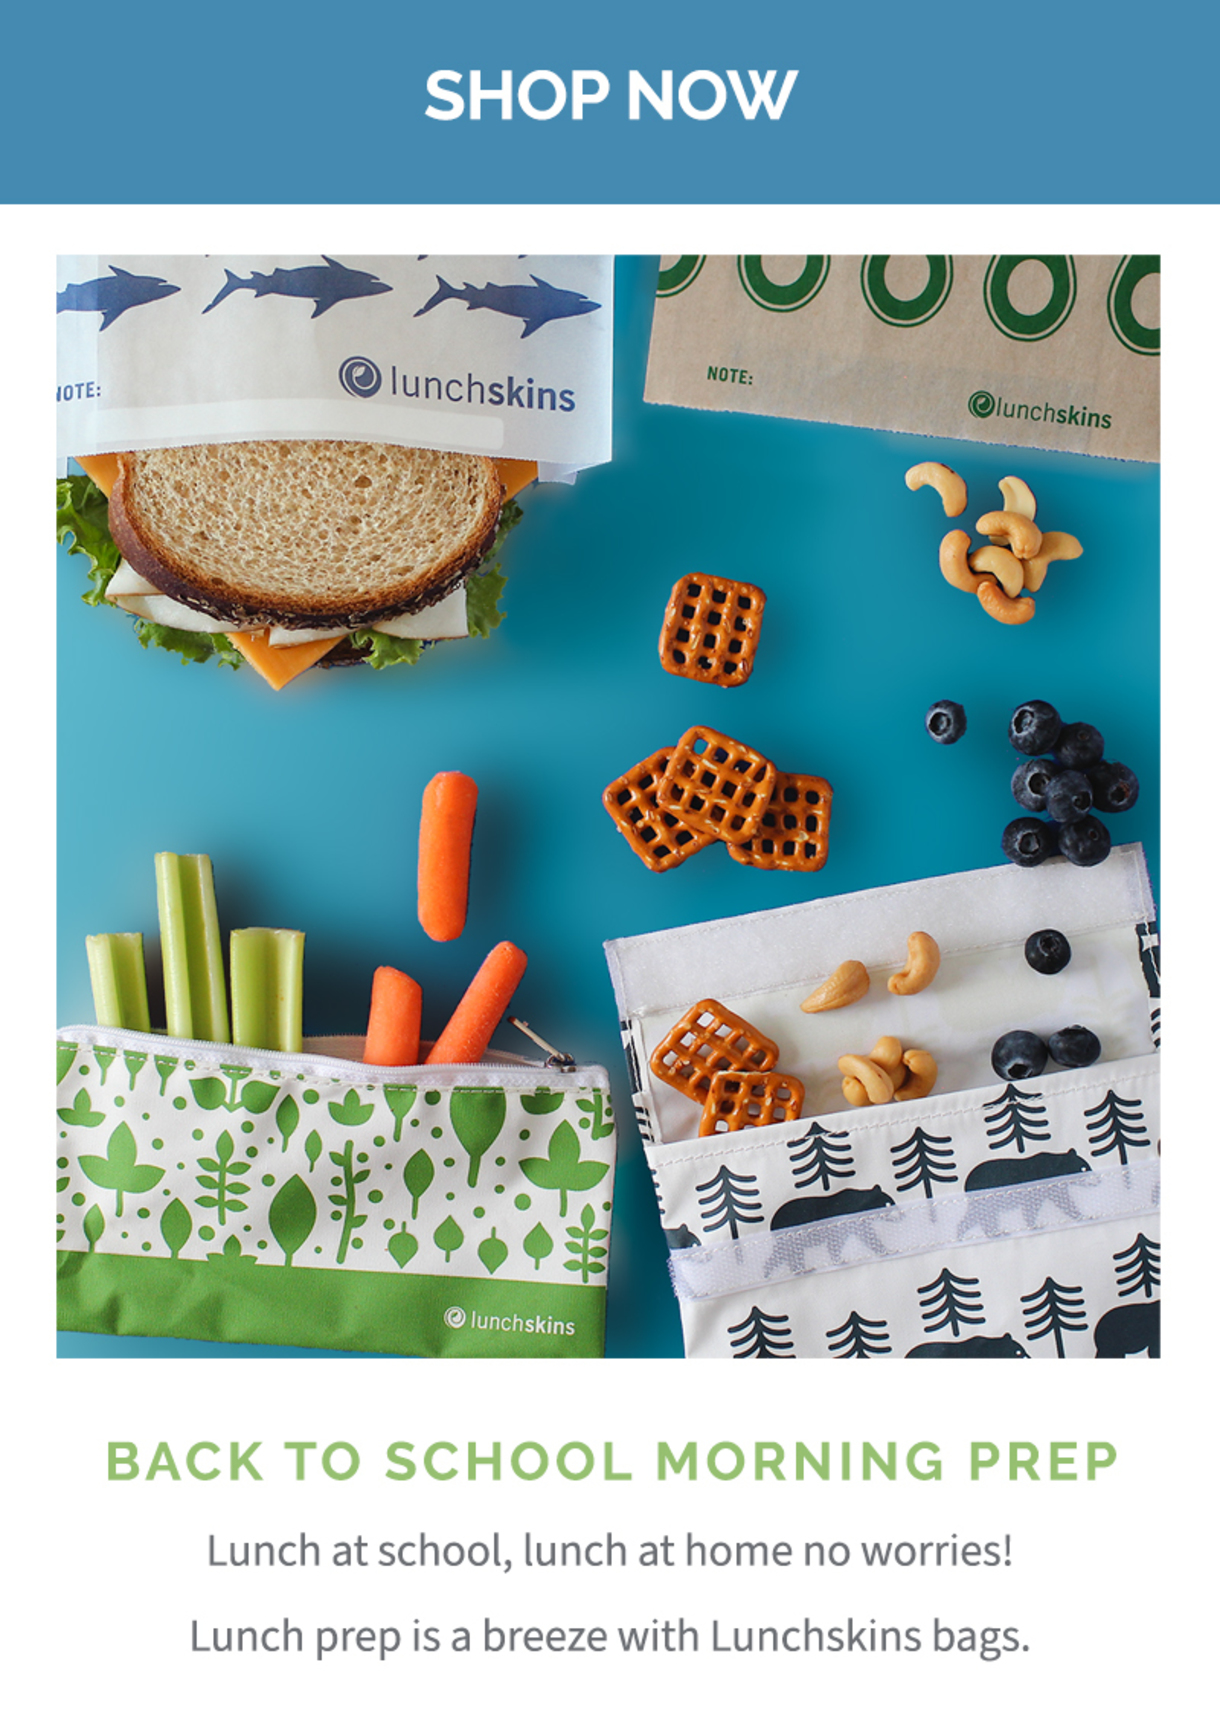 Lunchskins are perfect for school lunch!